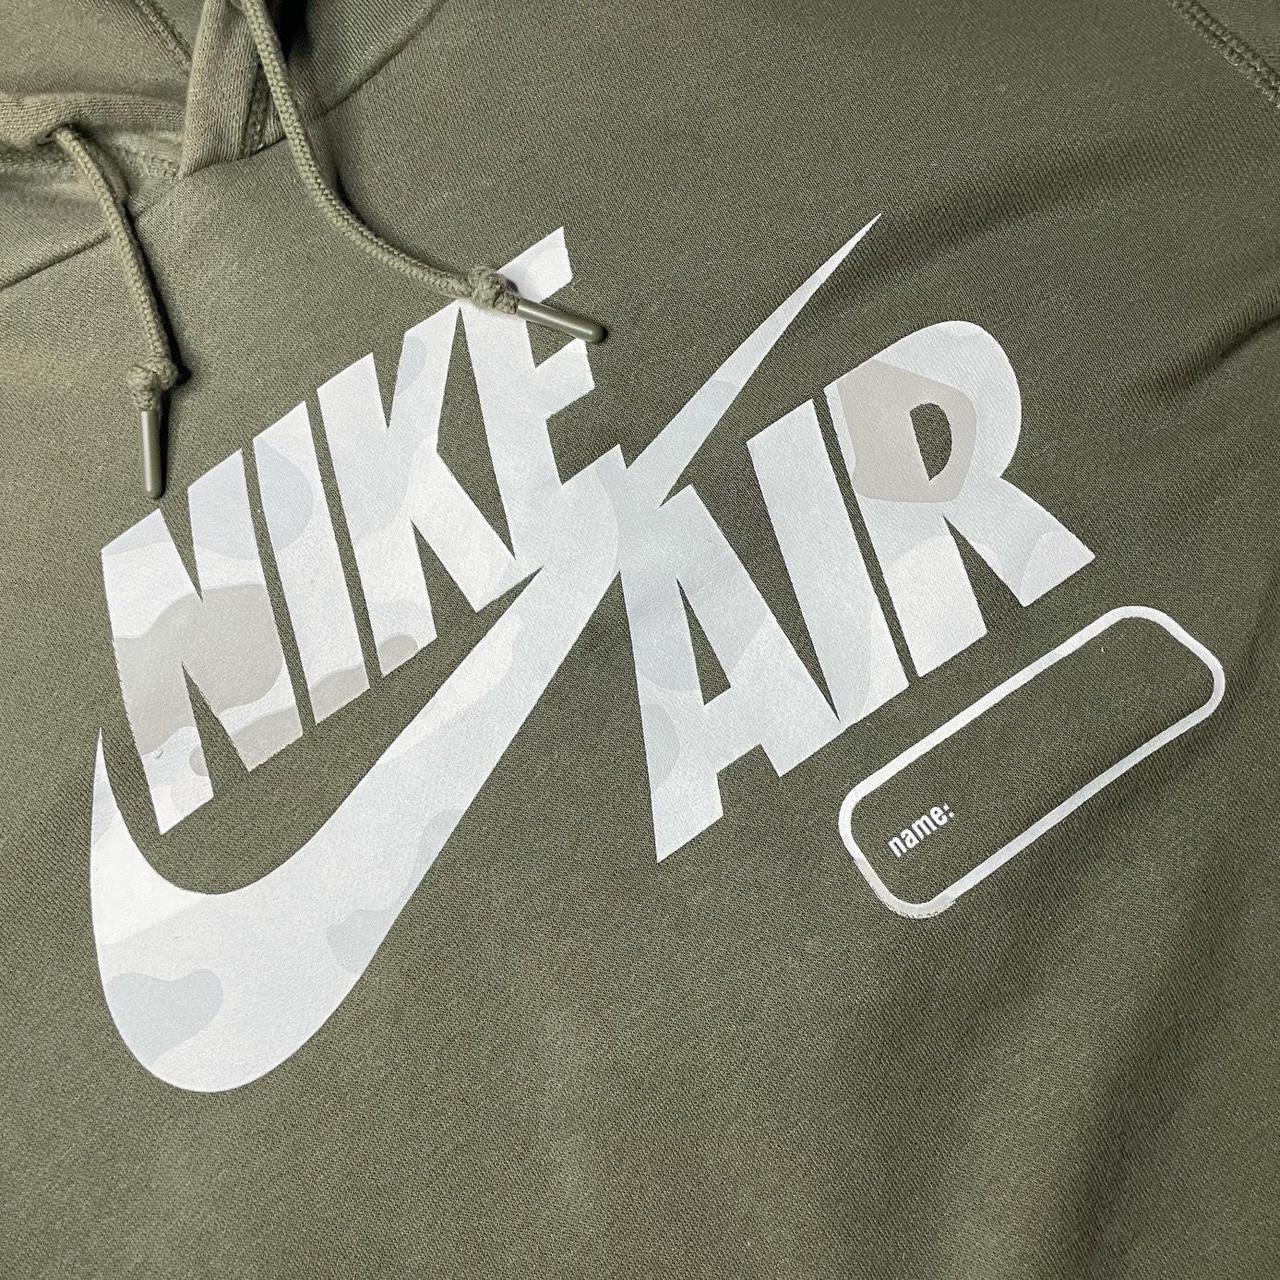 Product Image 4 - Nike Hoodie

- Adult L
- Great